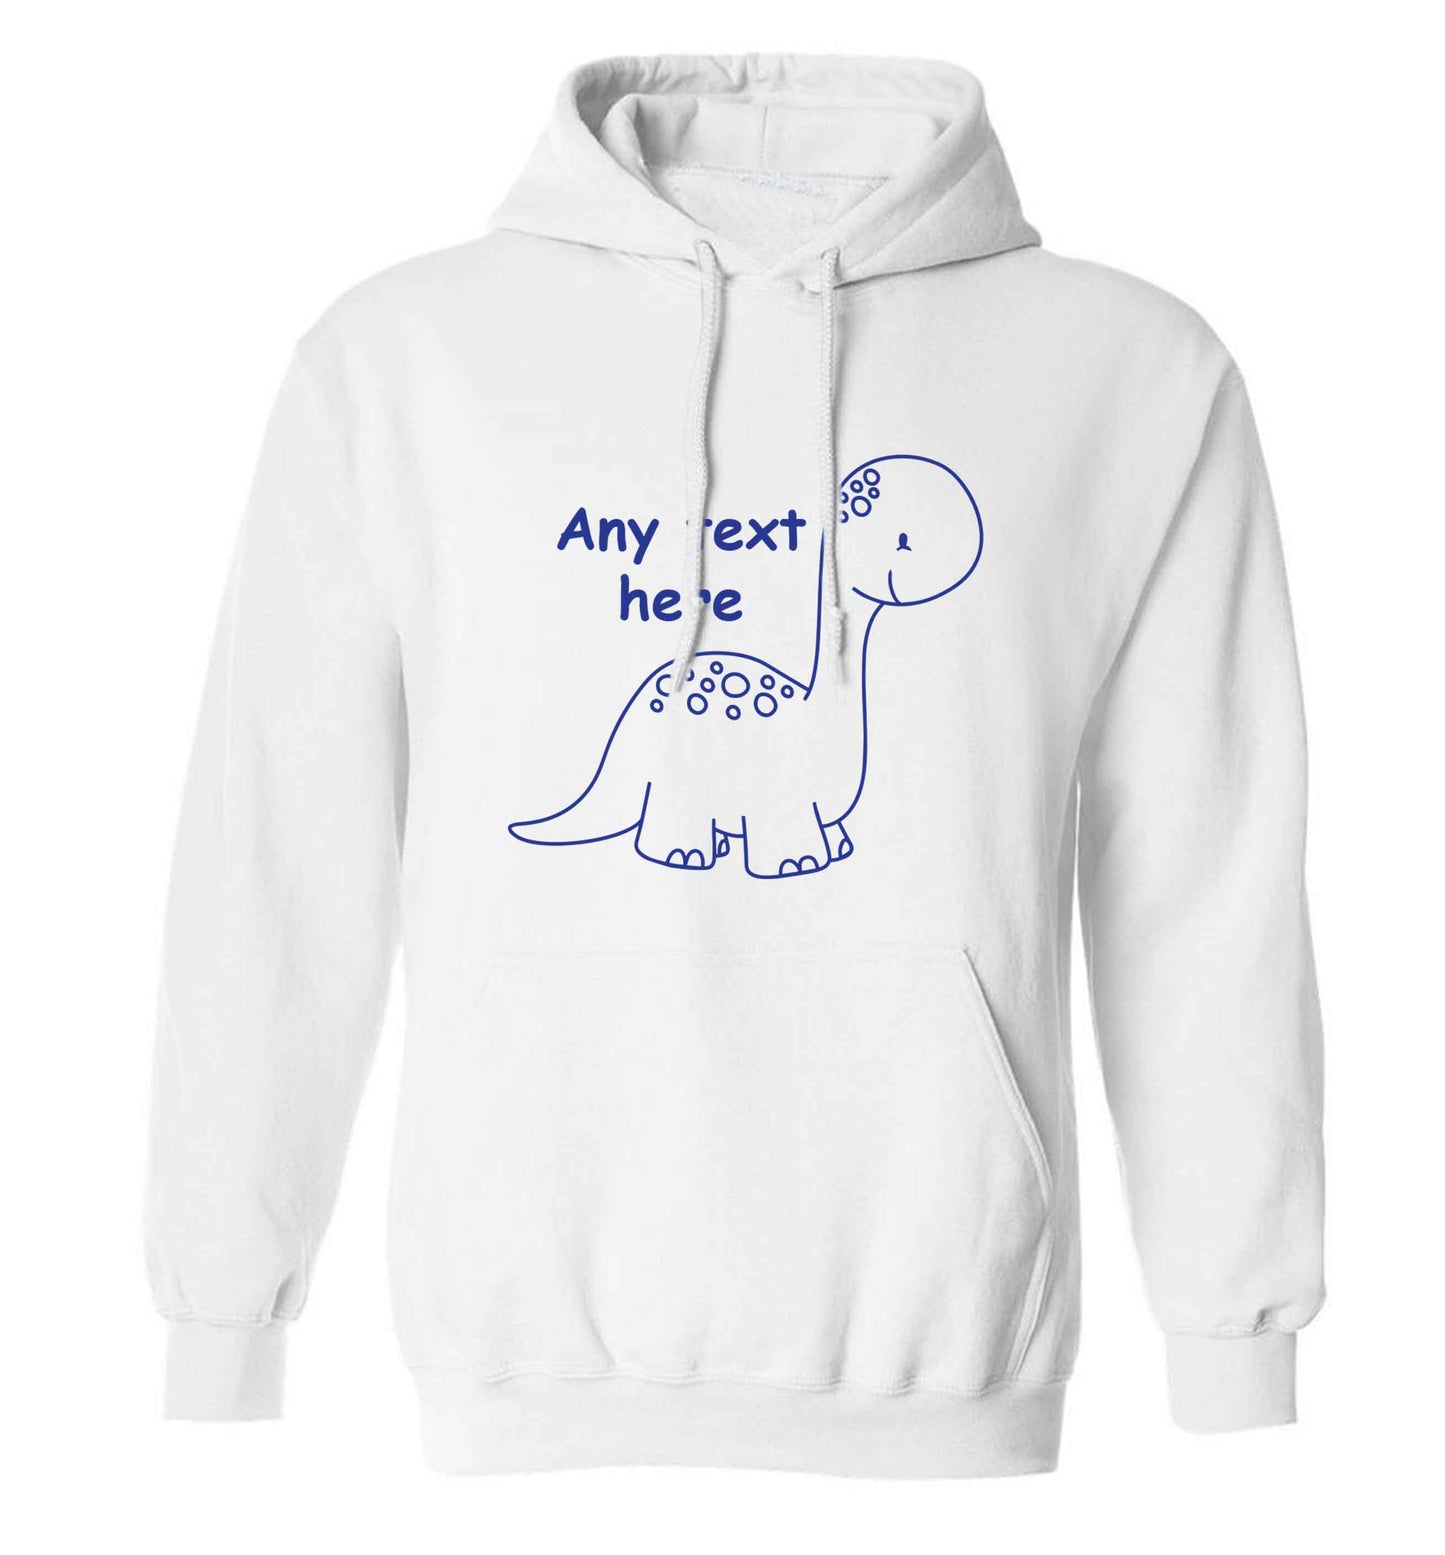 Dinosaur any text adults unisex white hoodie 2XL